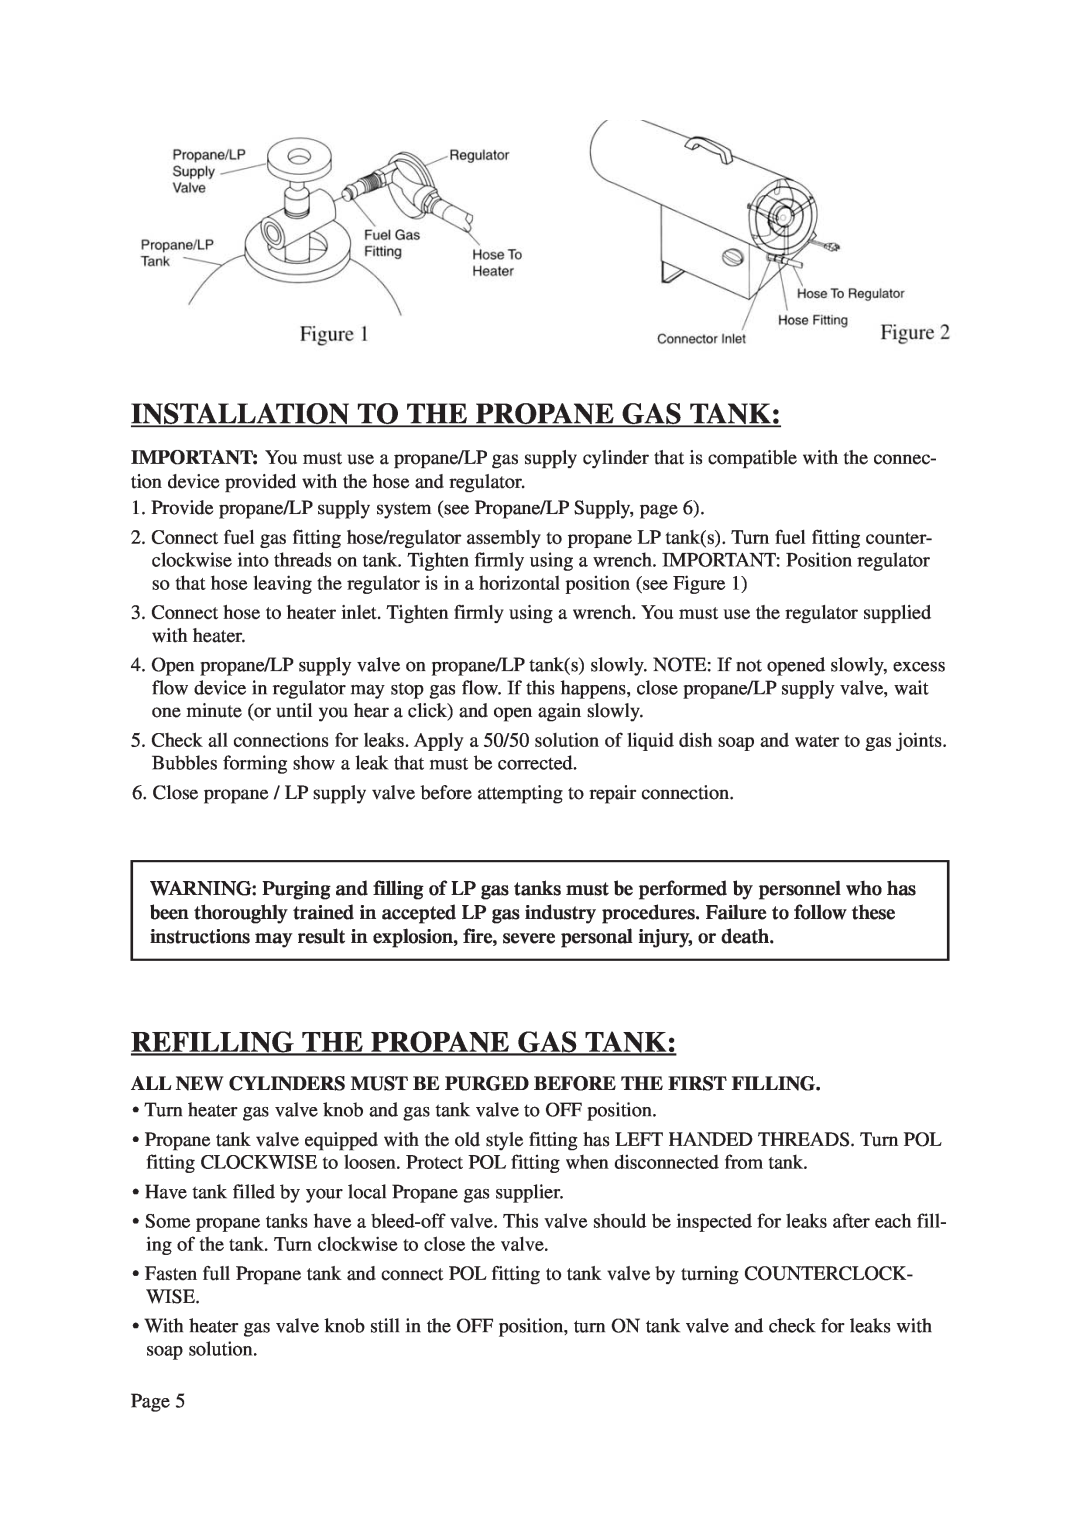 Vermont Casting CSA 2.14-2000, ANSI Z83.7-2000 Installation To The Propane Gas Tank, Refilling The Propane Gas Tank 